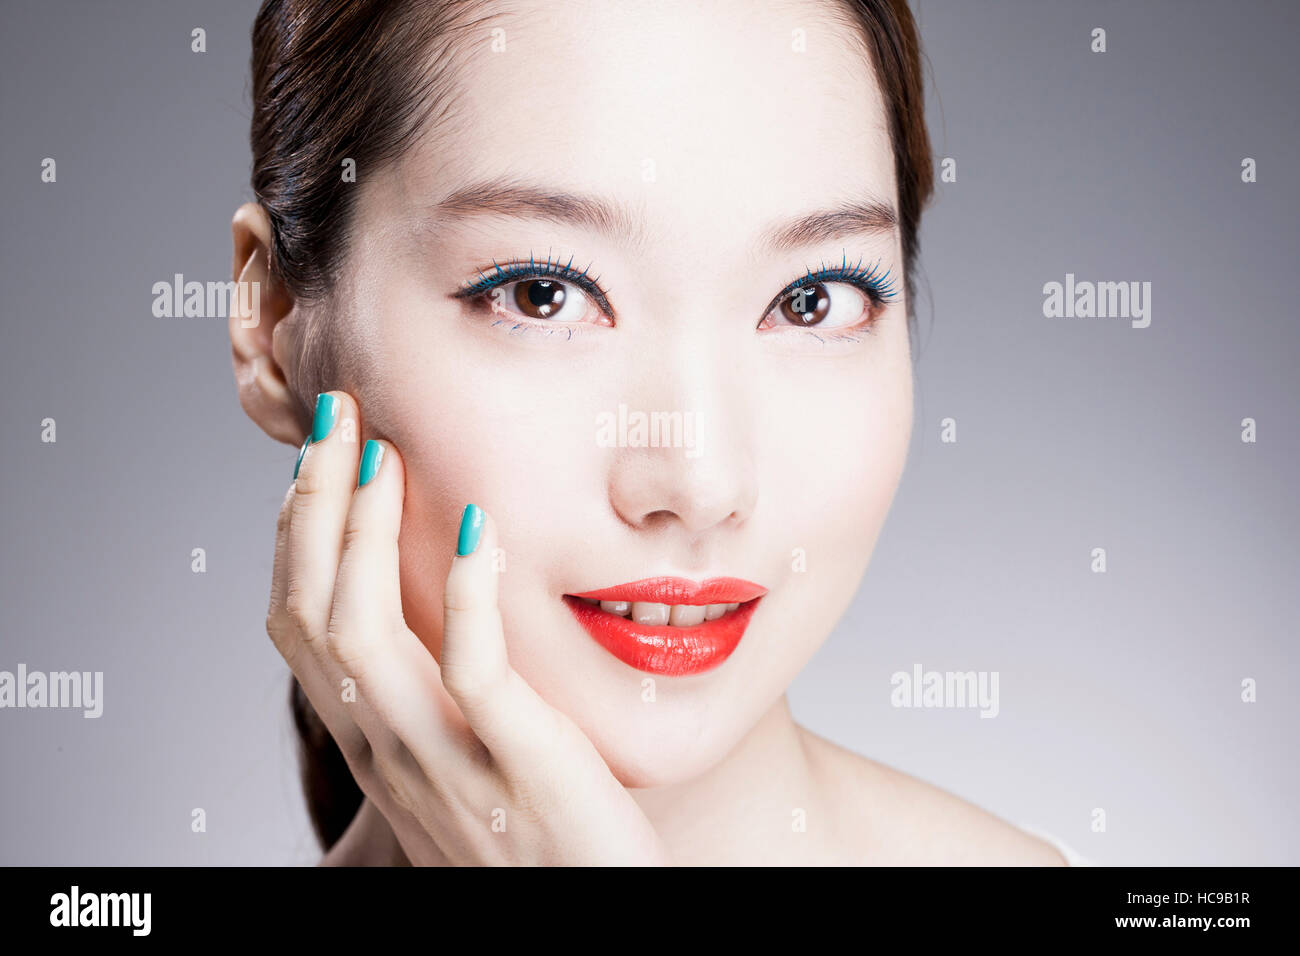 Portrait of young smiling Korean woman with red lips et blue nails Banque D'Images